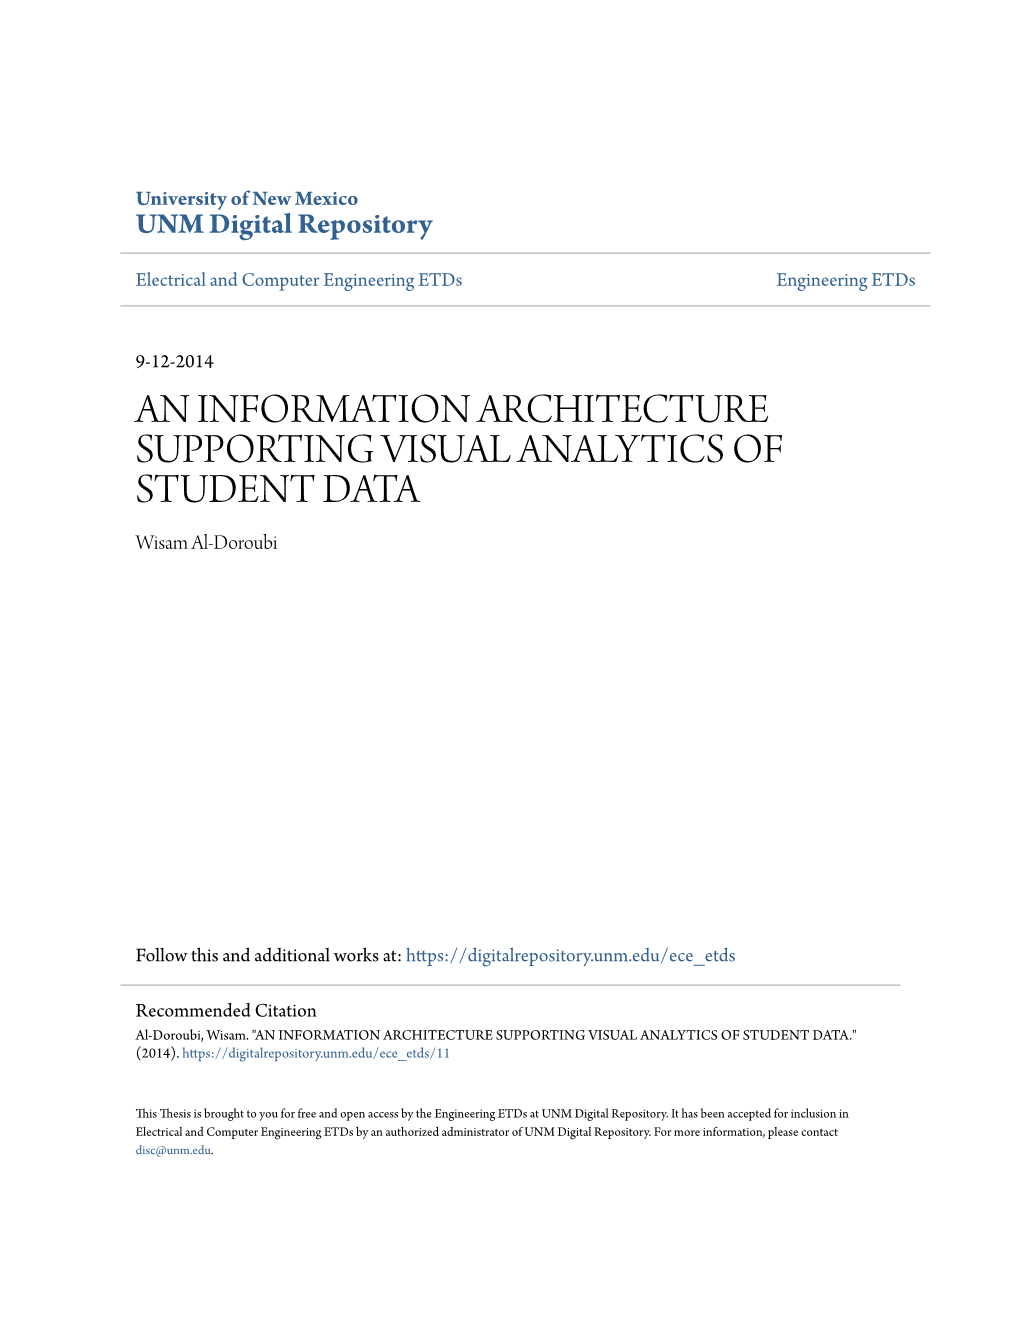 AN INFORMATION ARCHITECTURE SUPPORTING VISUAL ANALYTICS of STUDENT DATA Wisam Al-Doroubi